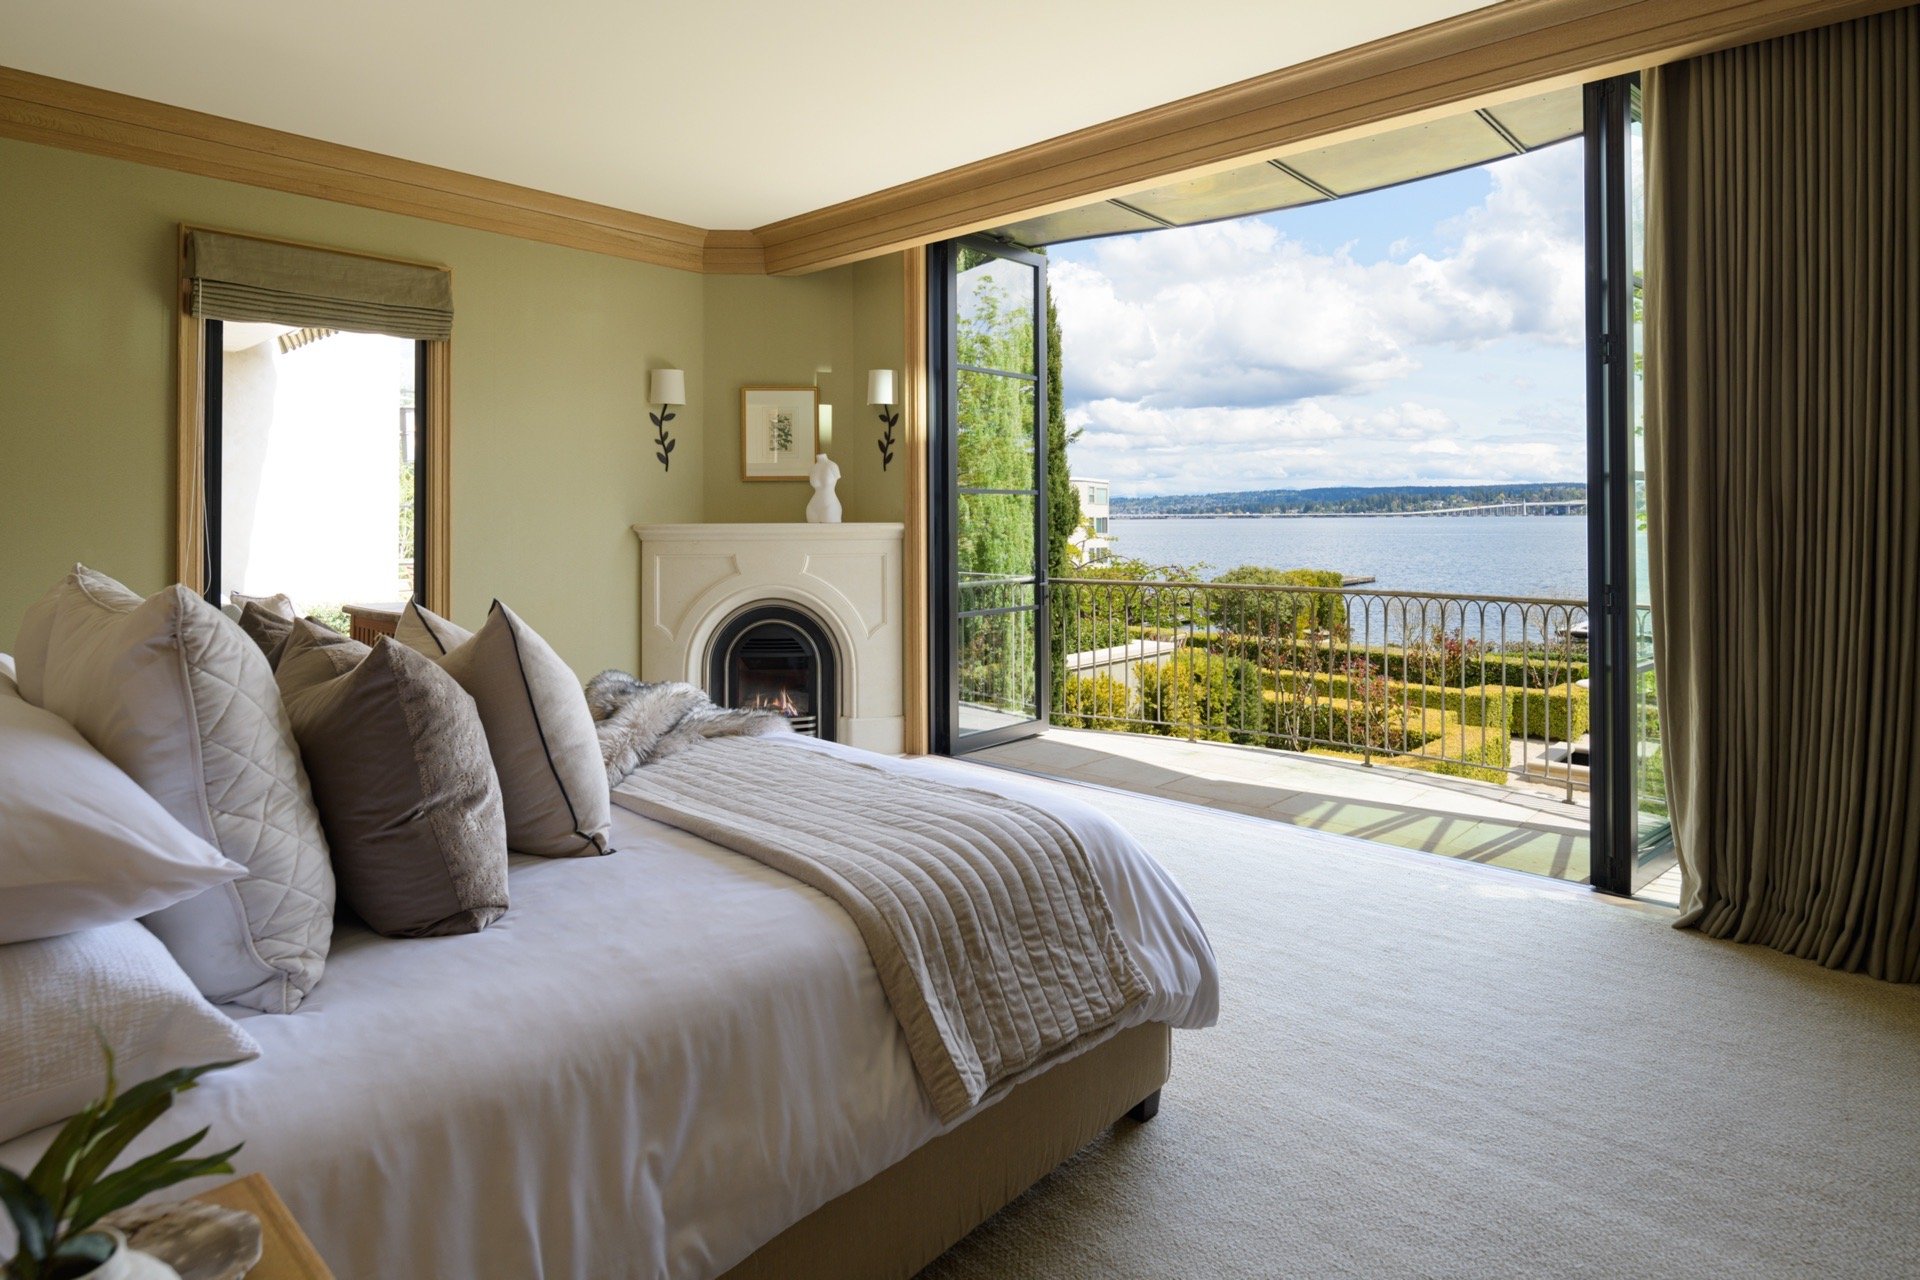 Francis York Waterfront Mansion in Seattle’s Exclusive Enclave, The Reed Estate 35.jpg